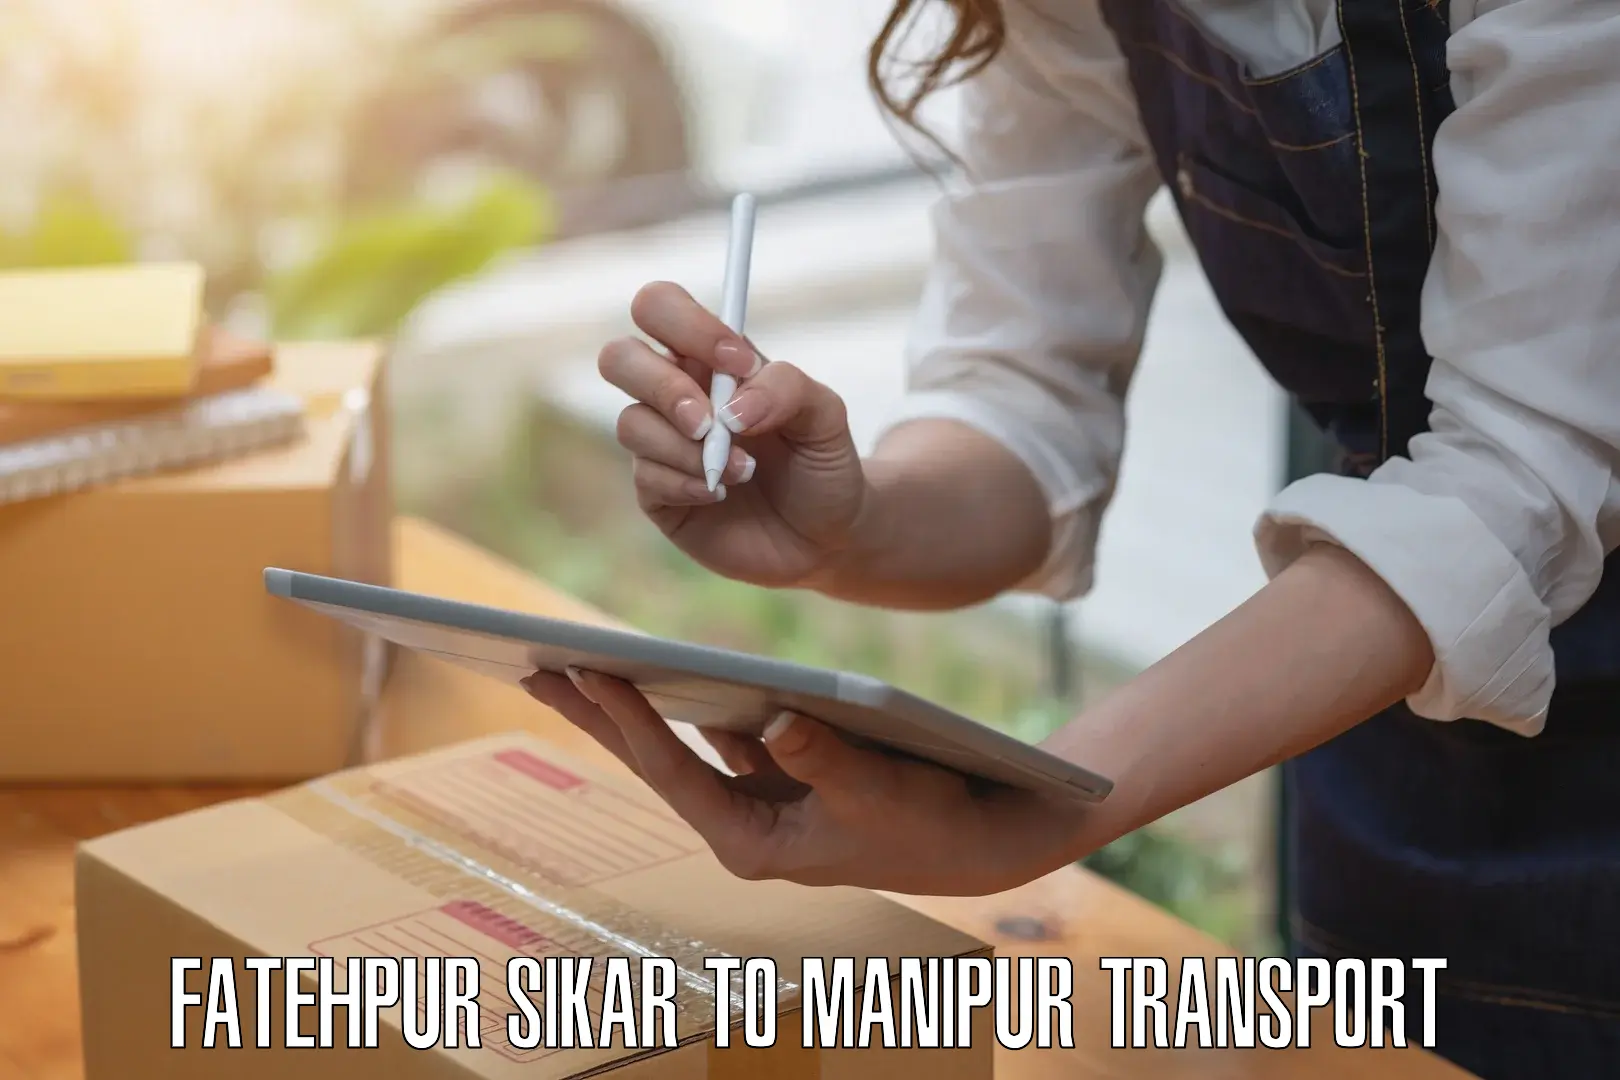 Nationwide transport services Fatehpur Sikar to Manipur